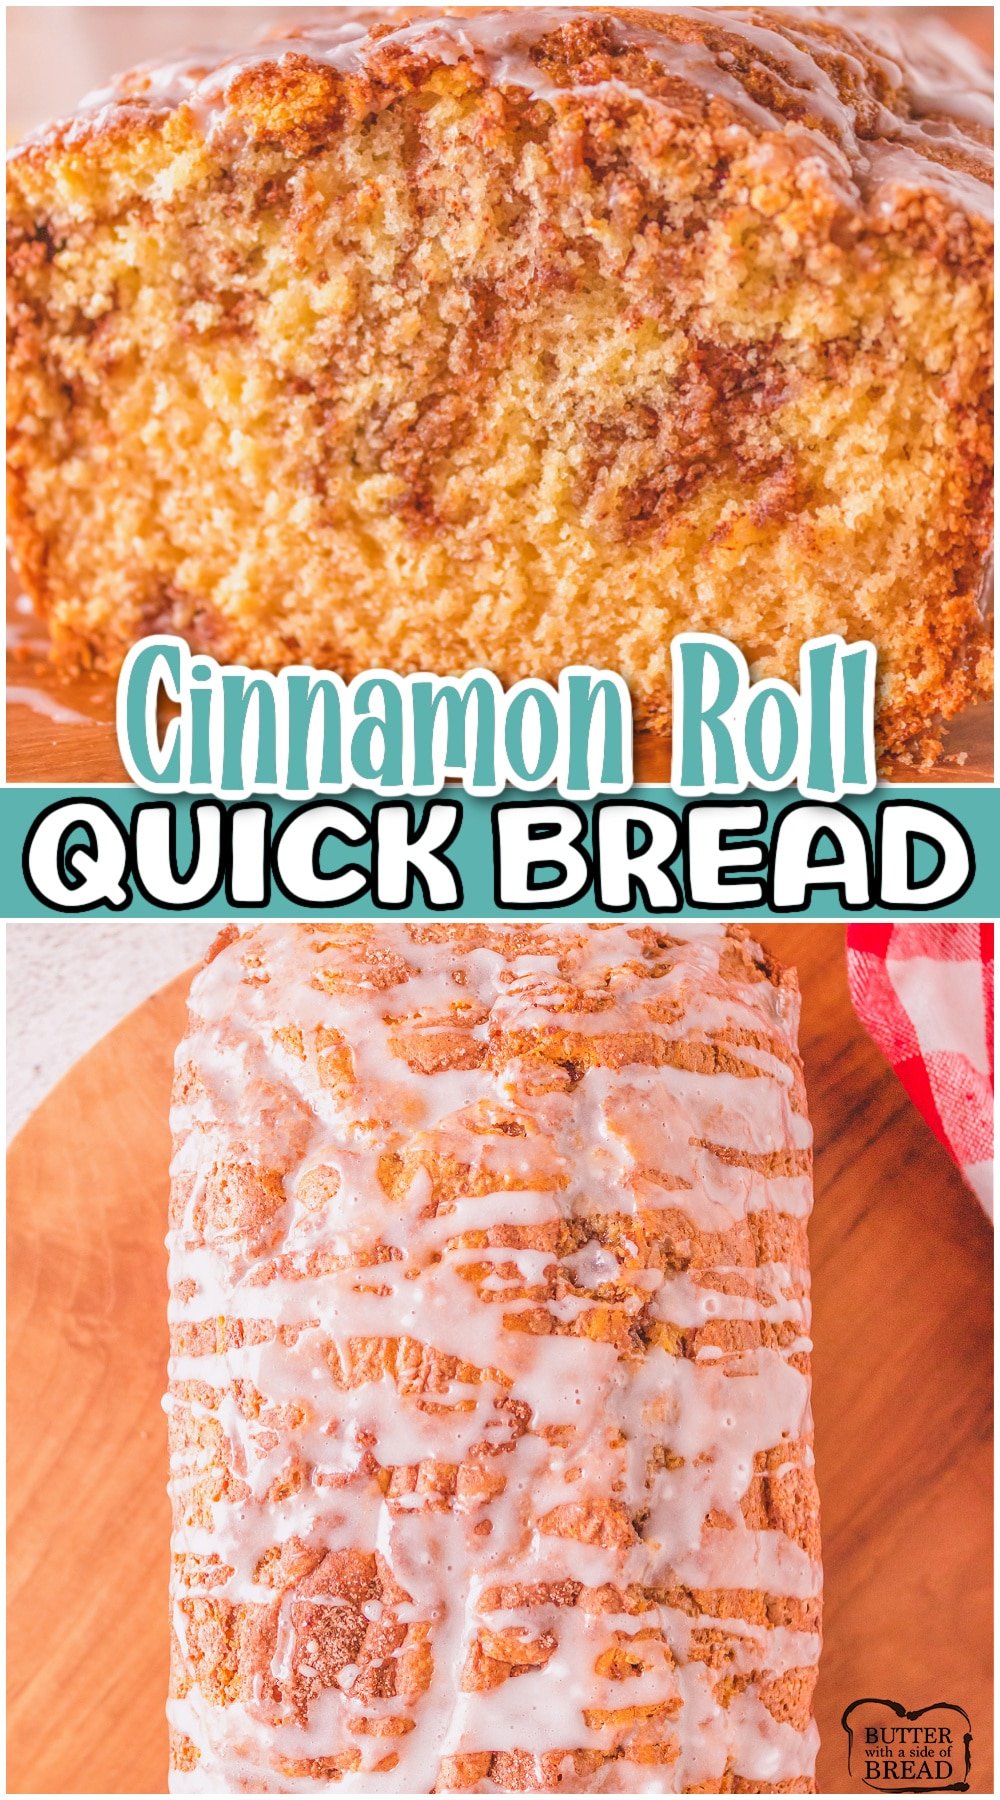 Easy Cinnamon Roll Quick Bread has all the delicious cinnamon roll flavors in an easy no-yeast bread recipe! Sweet bread batter swirled with cinnamon sugar and topped with a simple vanilla glaze.